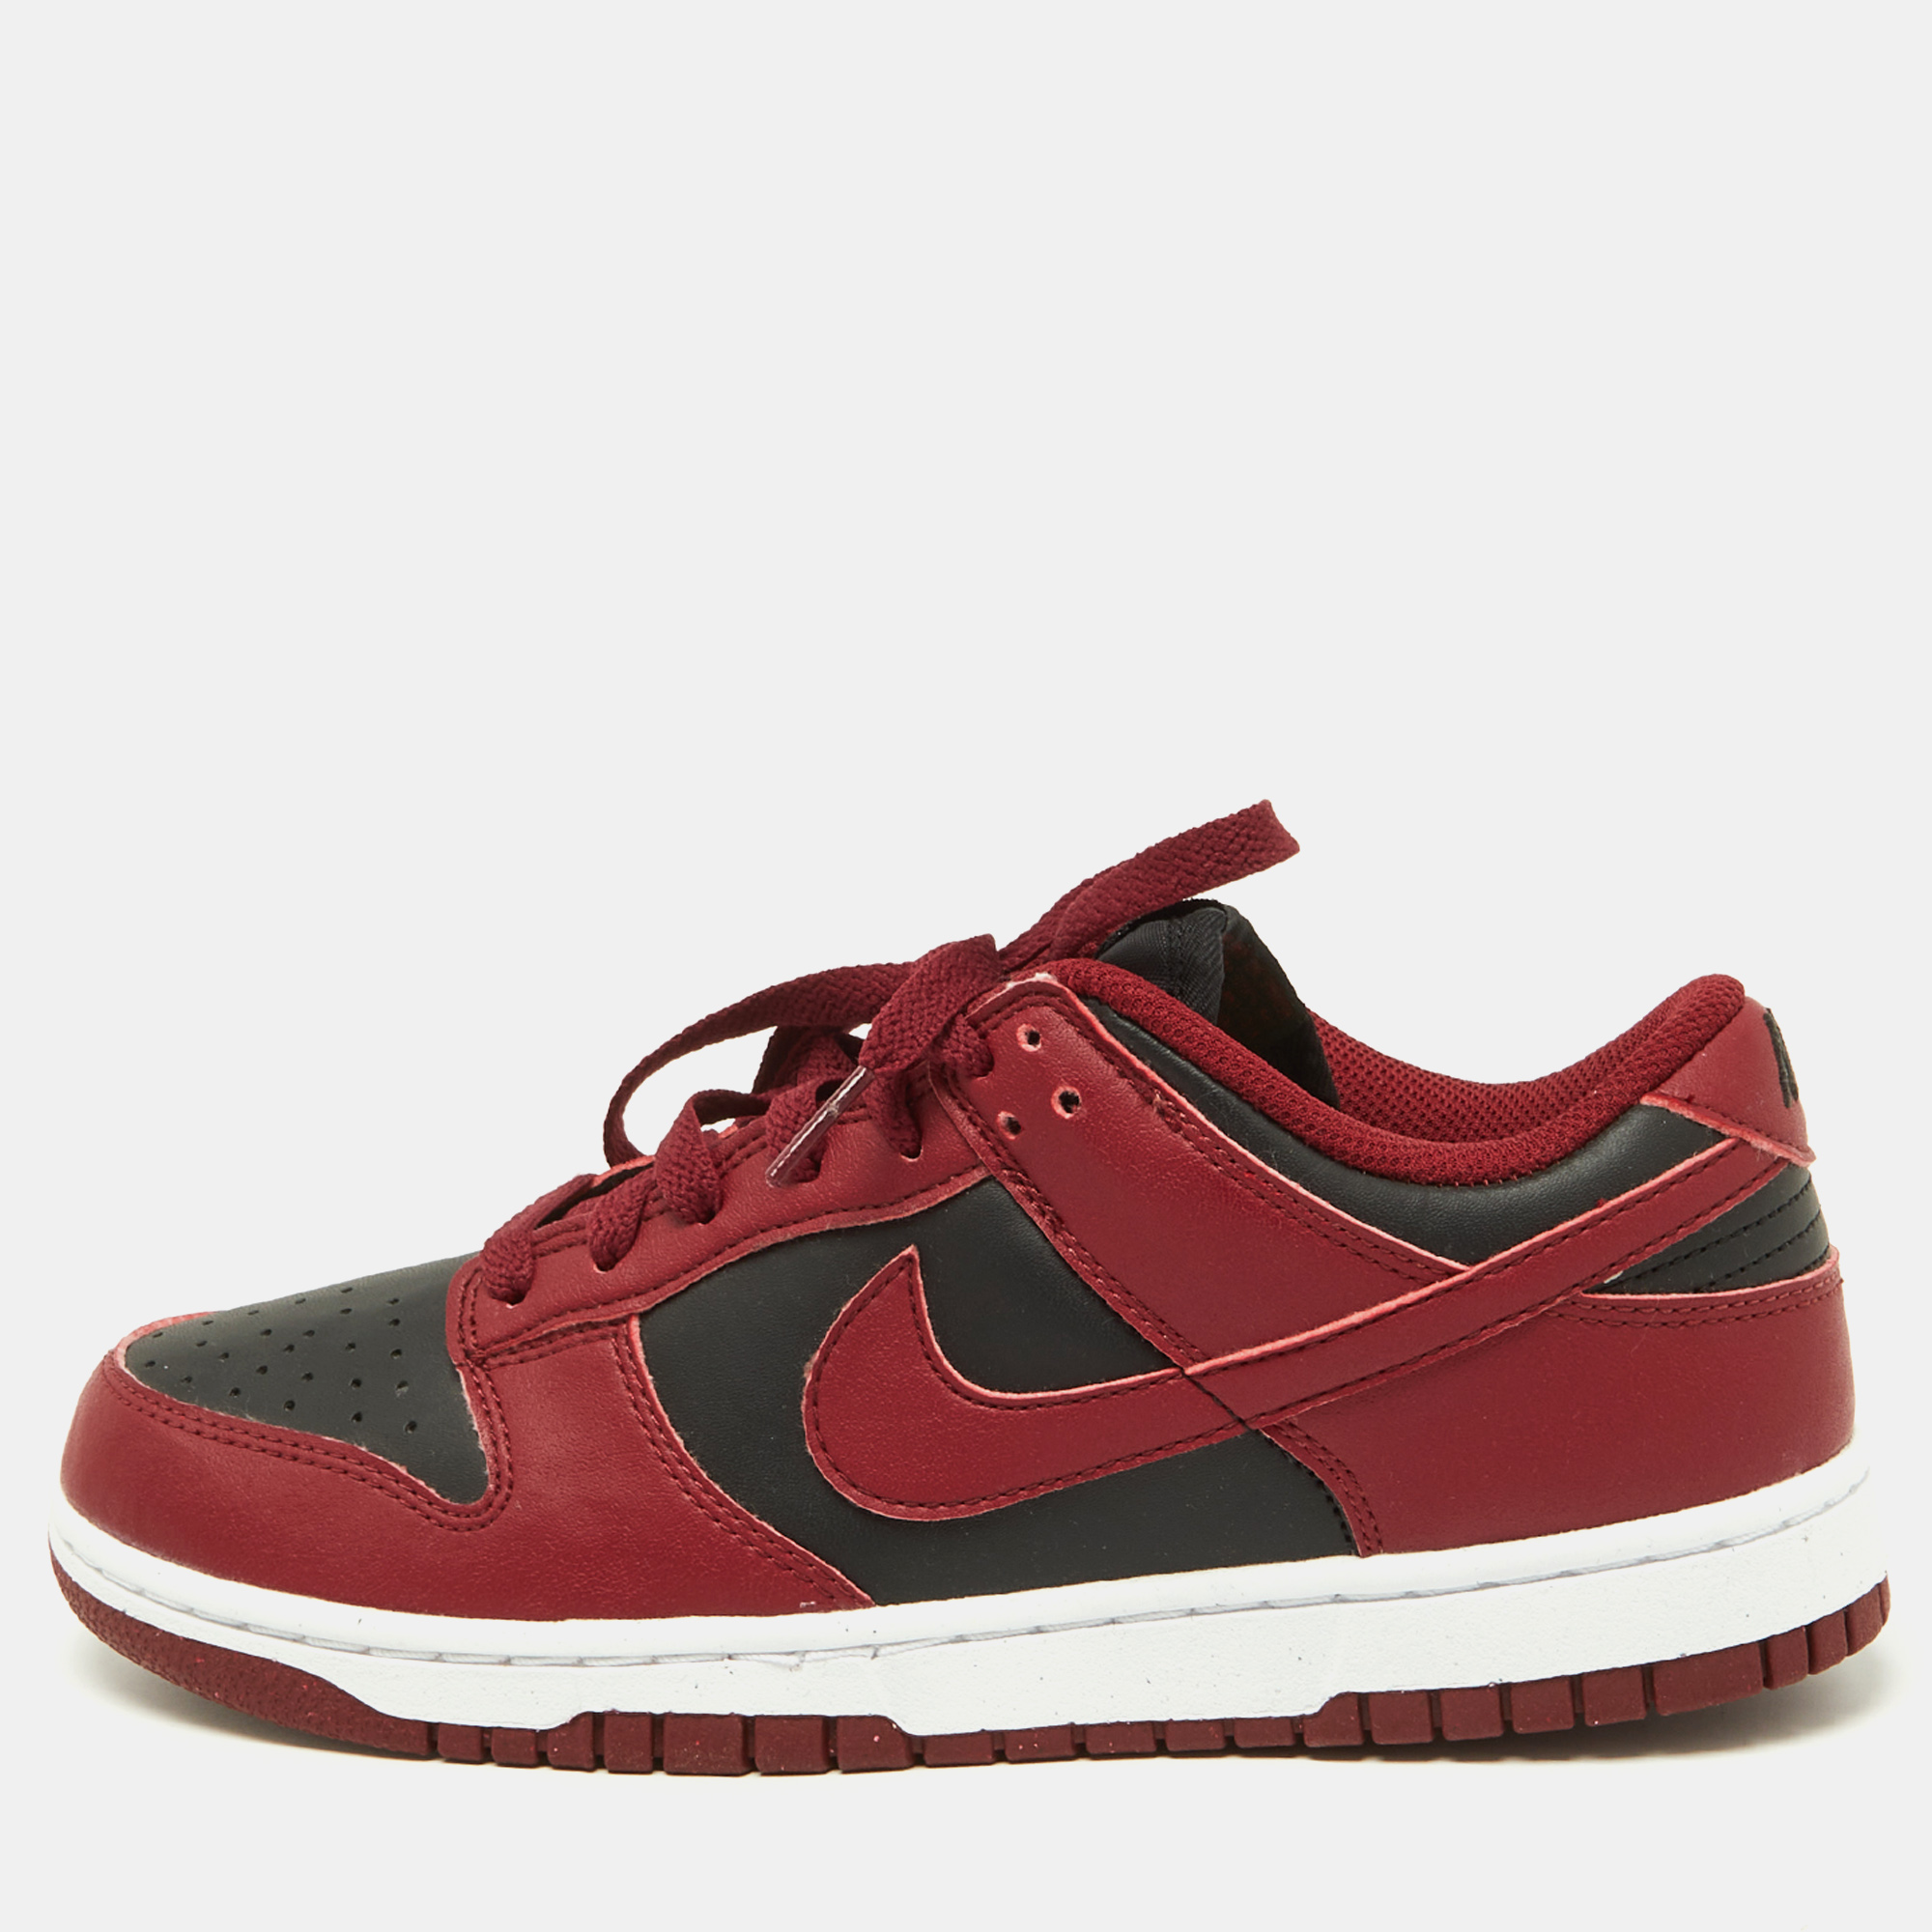 The Nike Dunk low top Team Red sneakers are a striking fusion of style and sportiness. Crafted with premium leather the bold red and black colorway exudes confidence and sophistication. The iconic Dunk silhouette ensures timeless appeal while the low top design offers comfort and versatility for everyday wear.